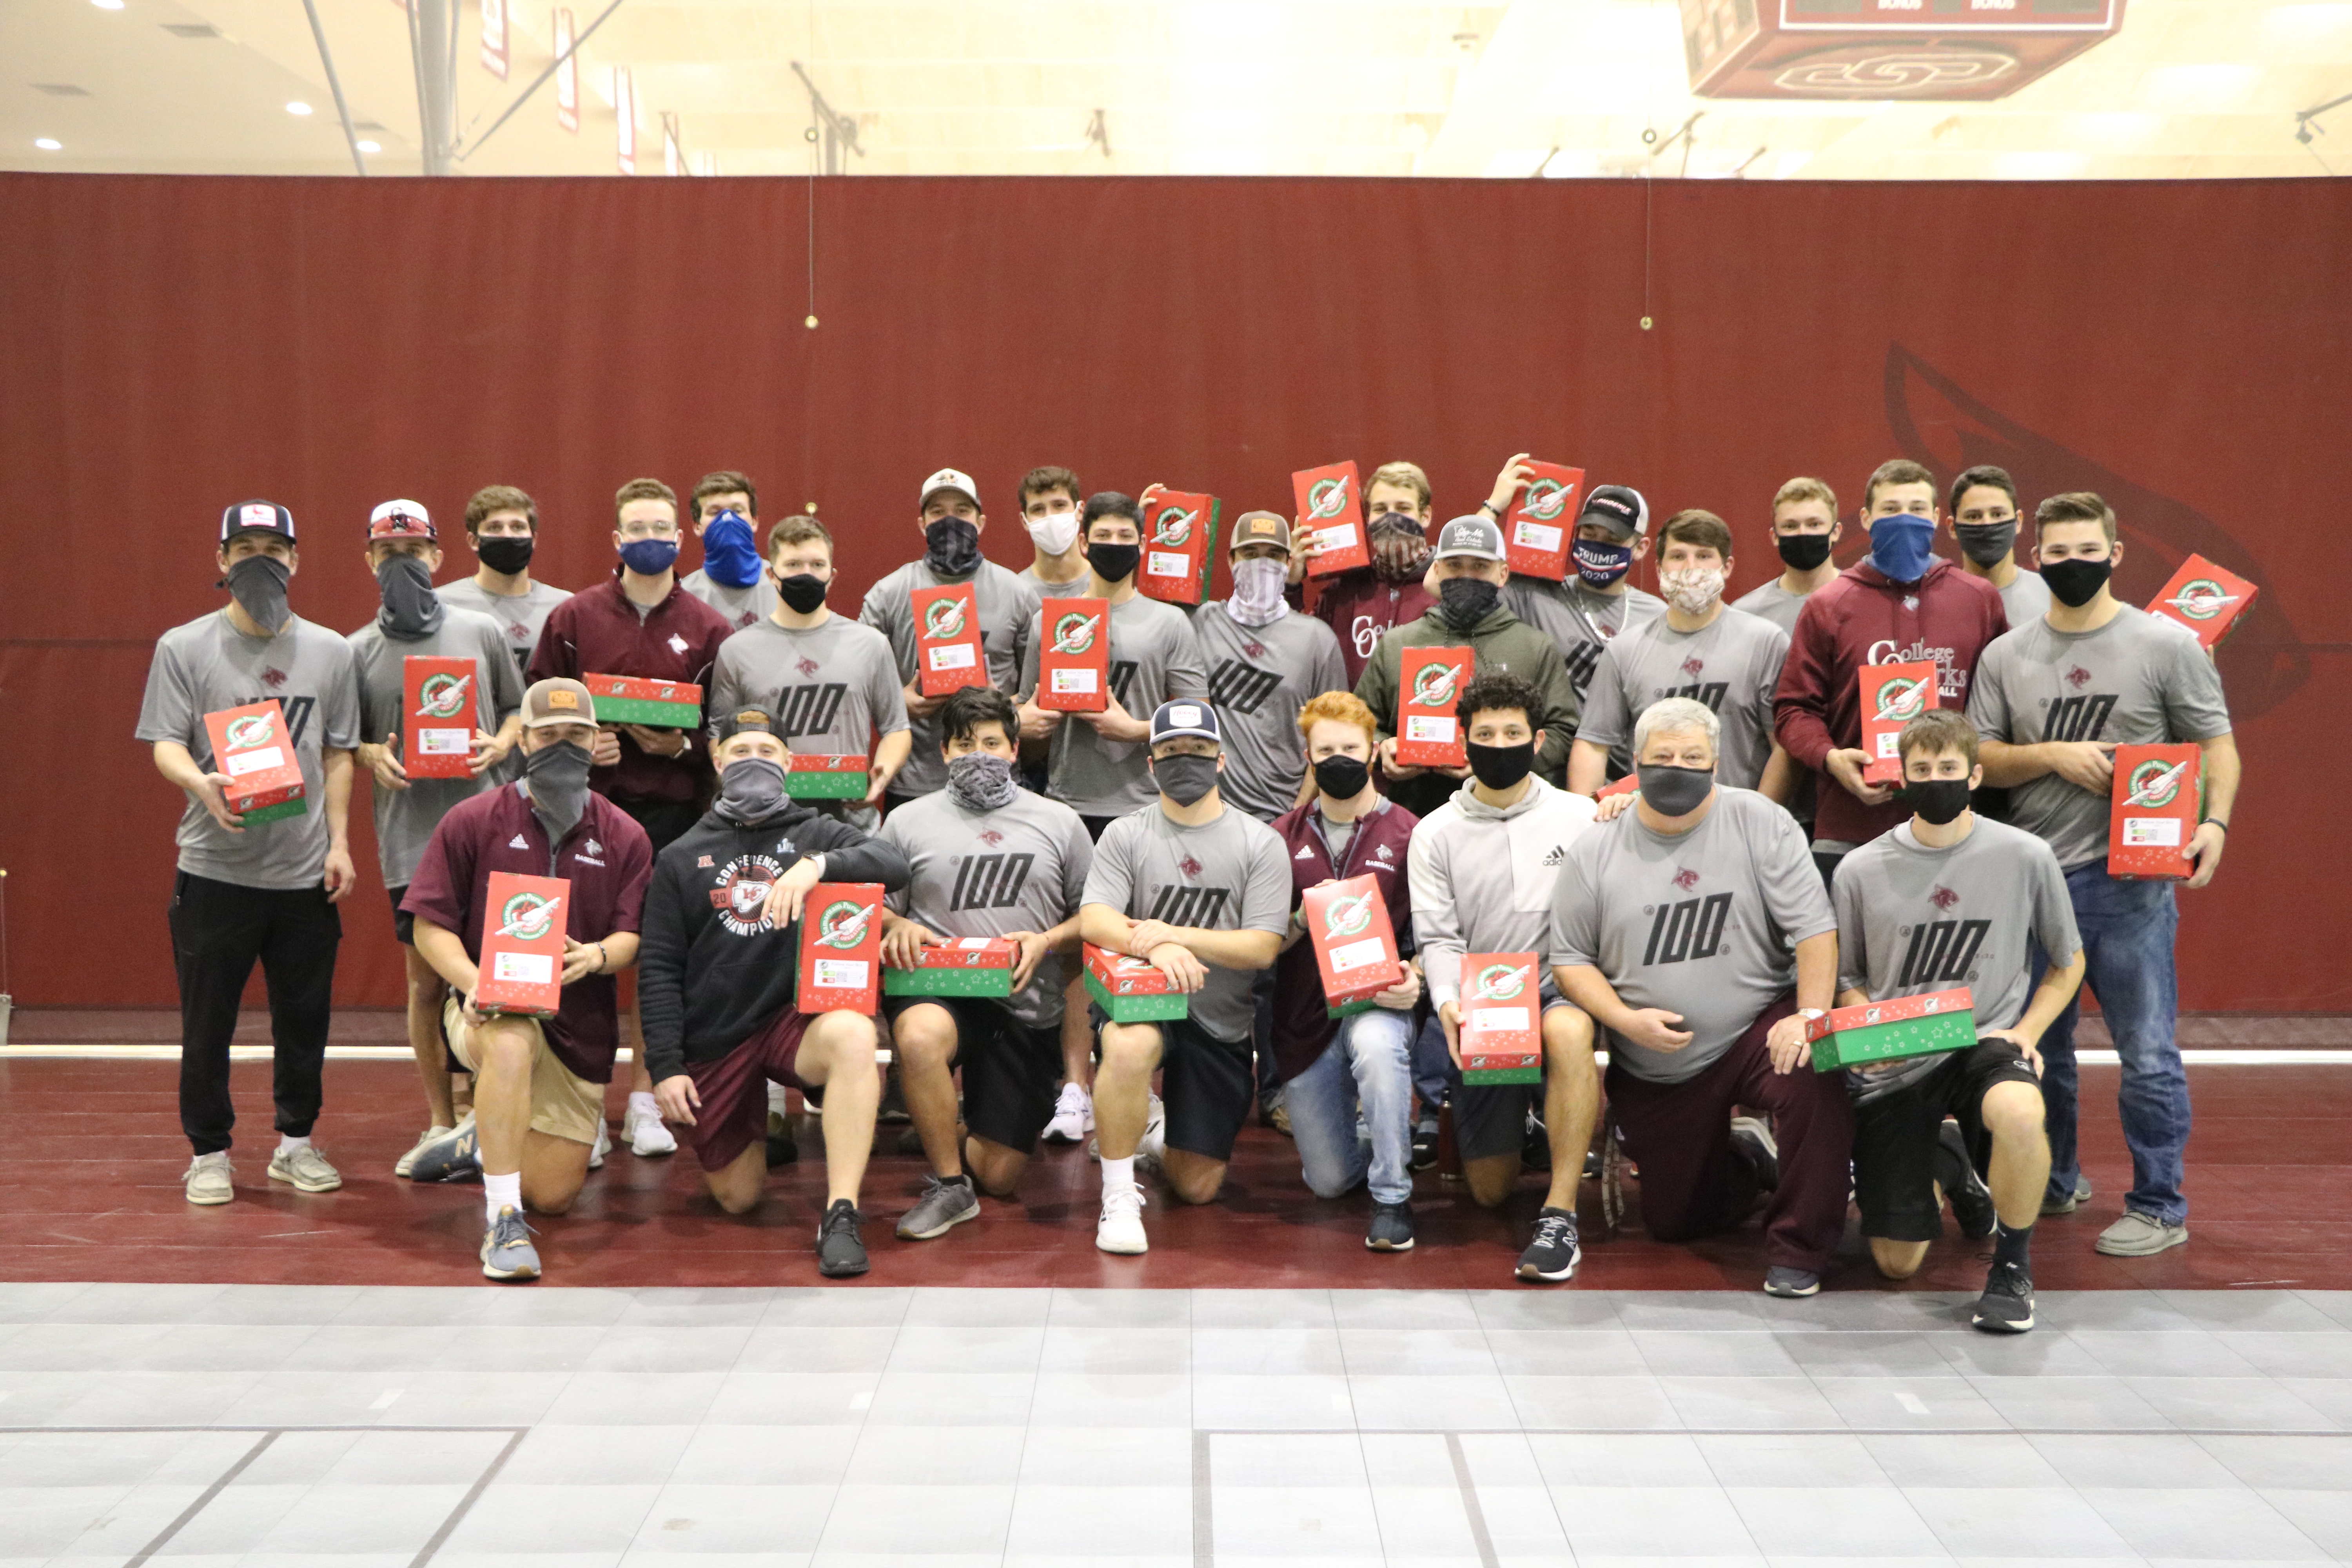 College of the Ozarks Men's Baseball team pose for photo with shoeboxes.